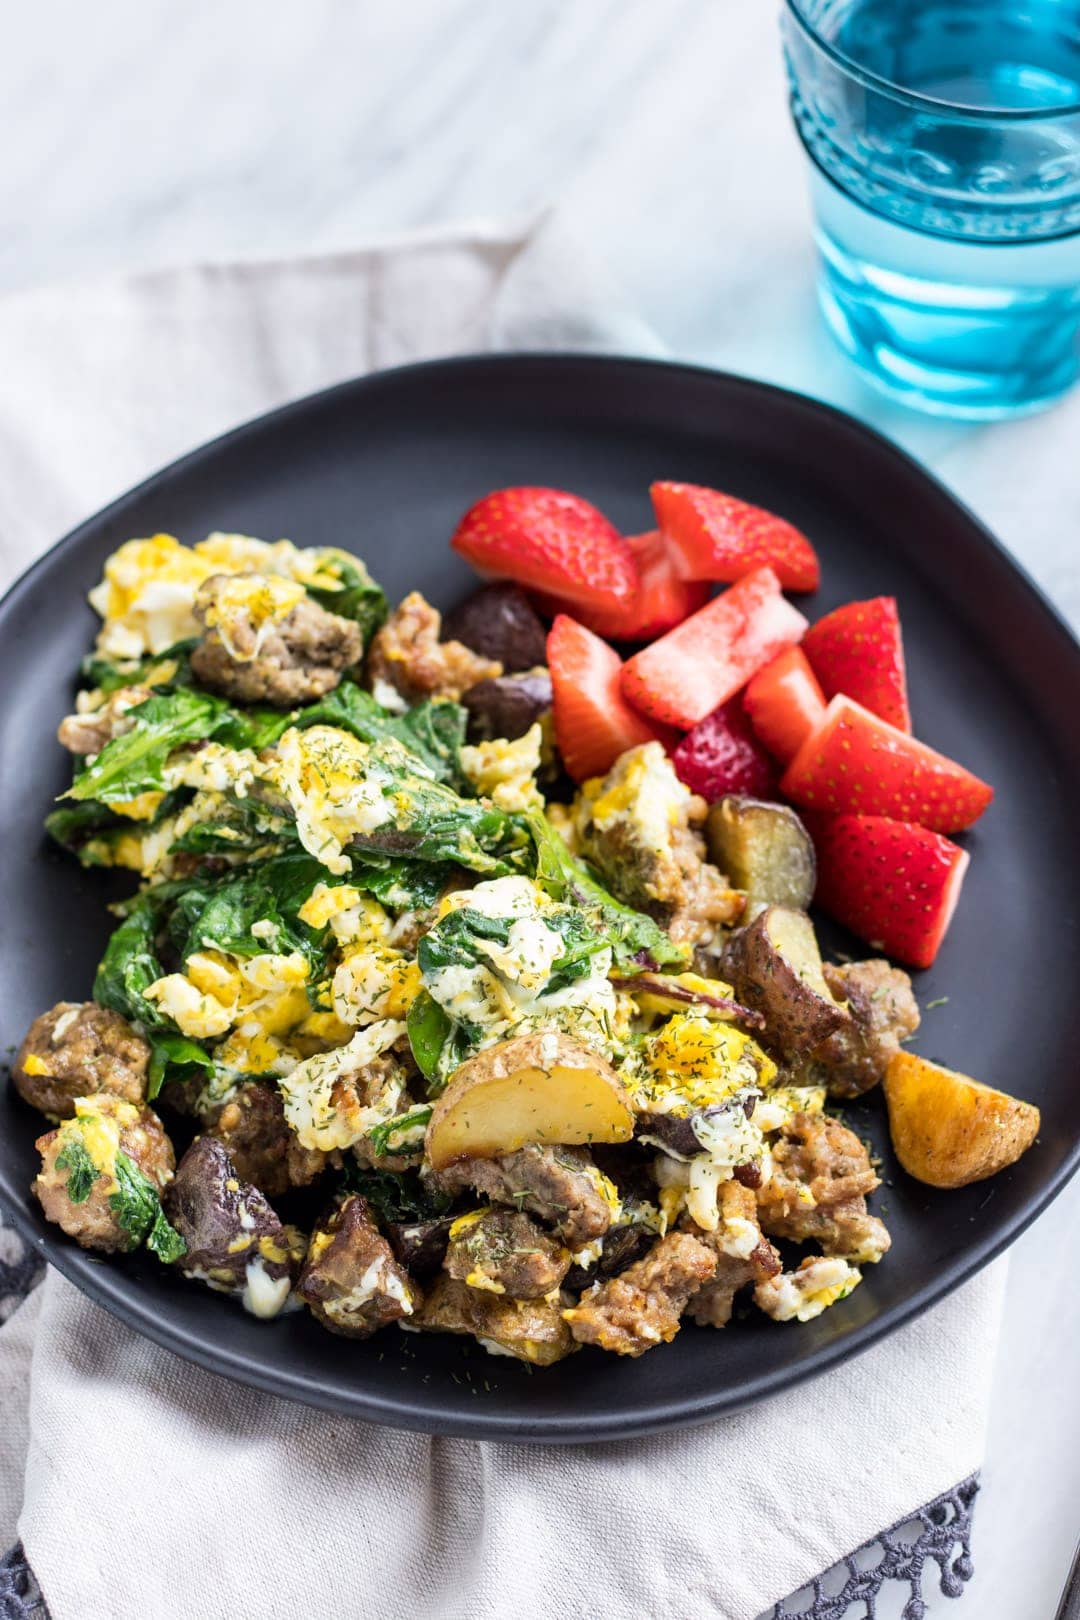 A plate of eggs scrambled with sausage crumbles, roasted potatoes, and leafy greens. There are strawberries on the side.